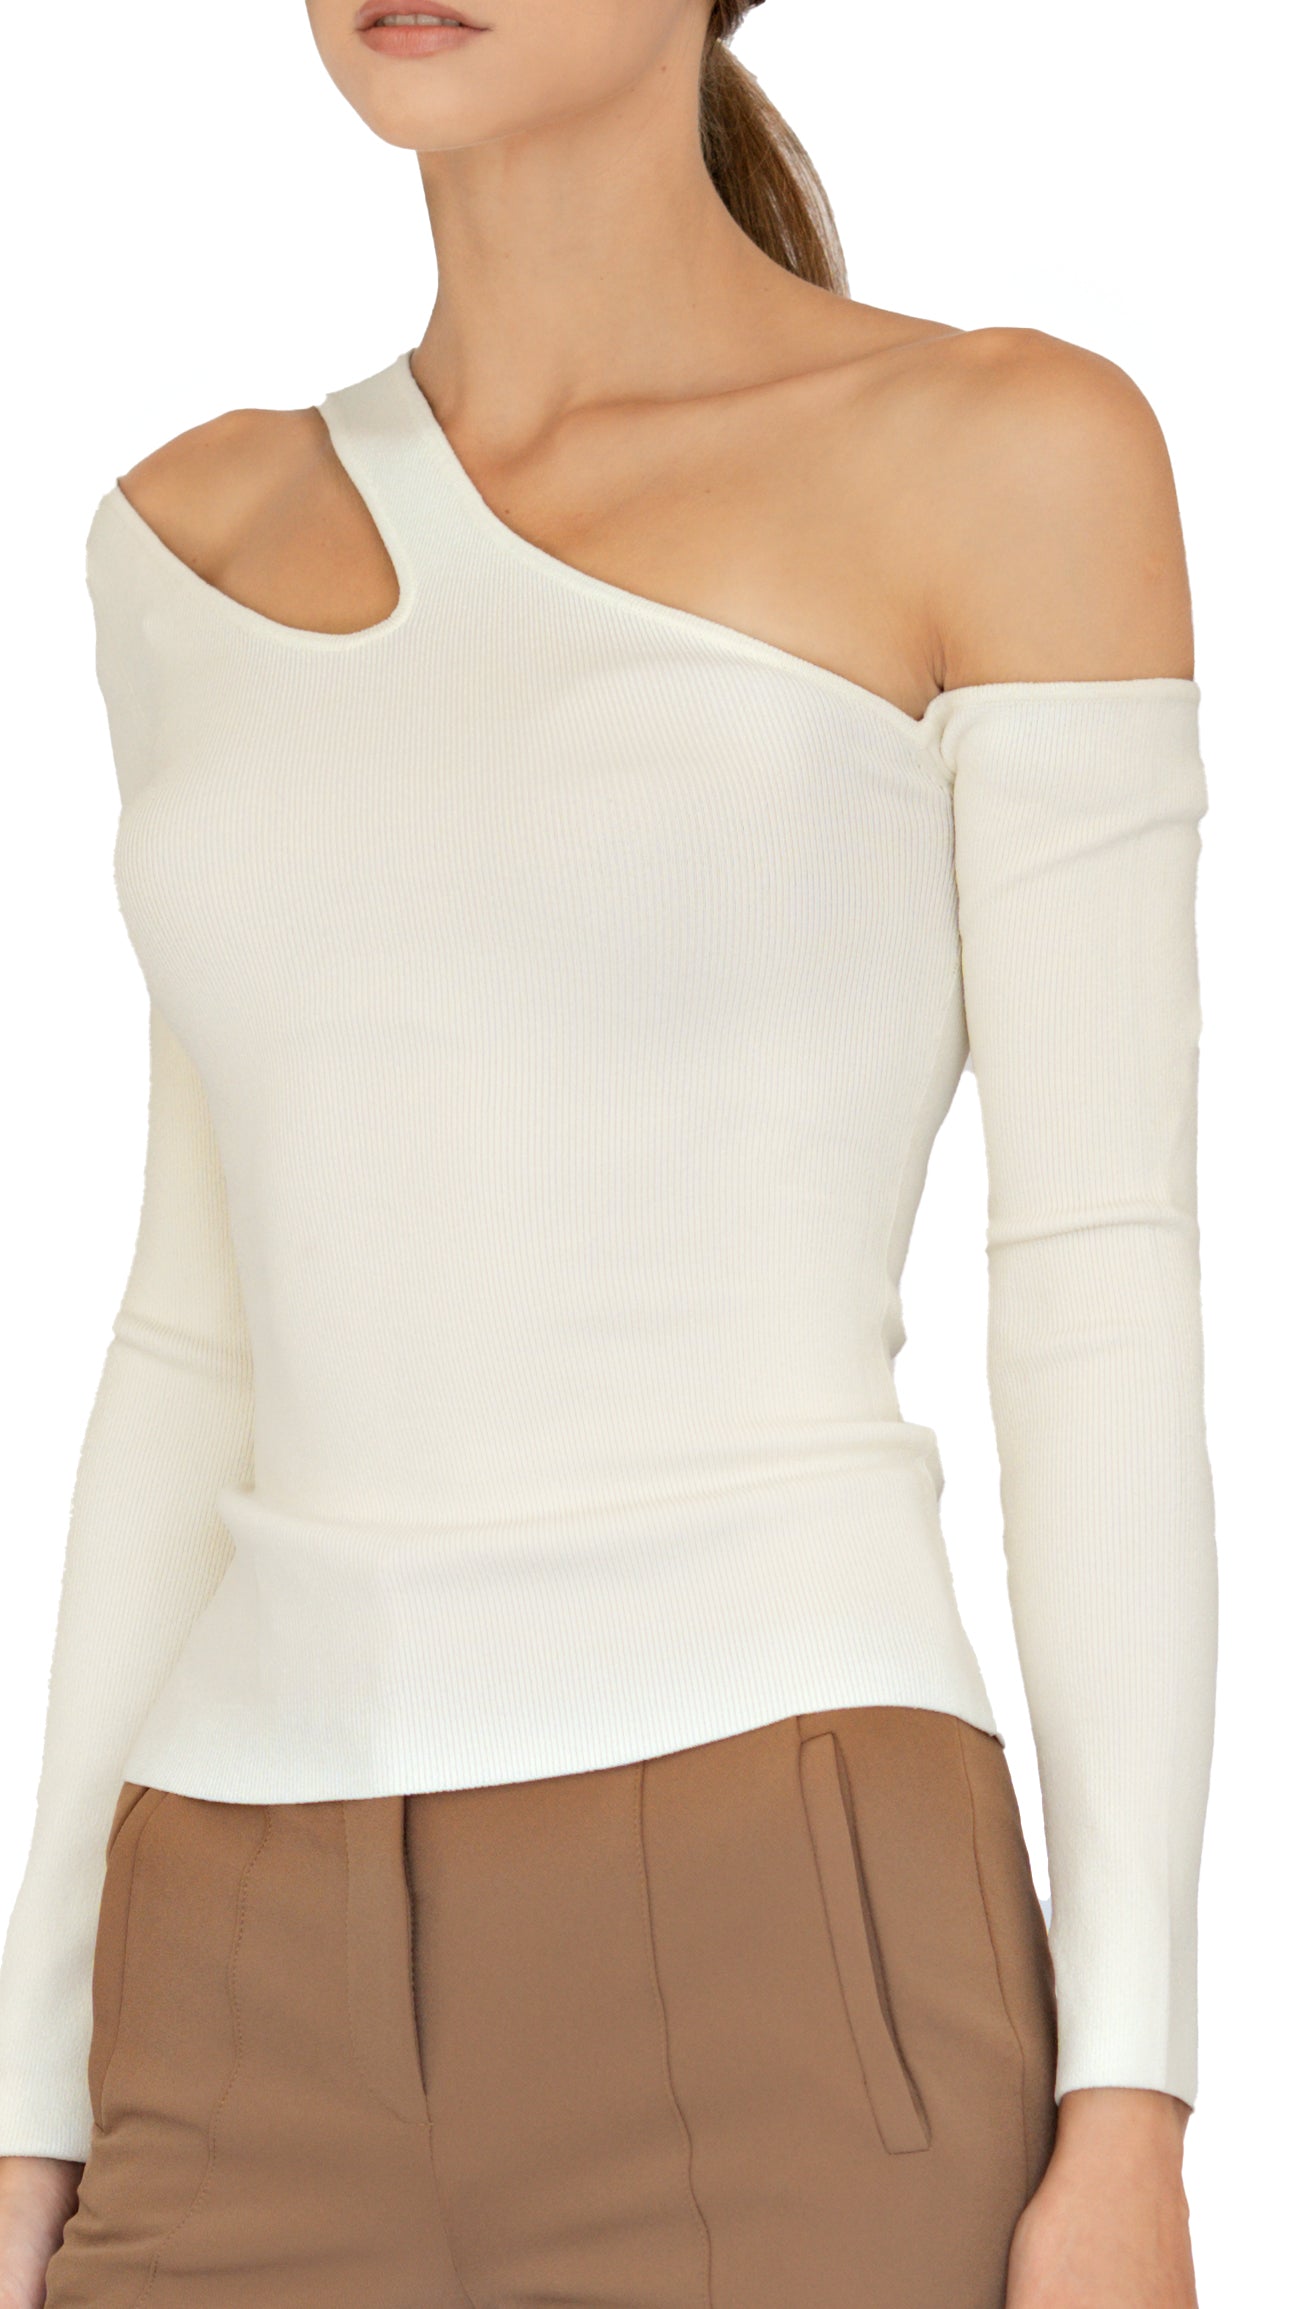 Autumn Cashmere one shoulder long sleeve knit top in cream color